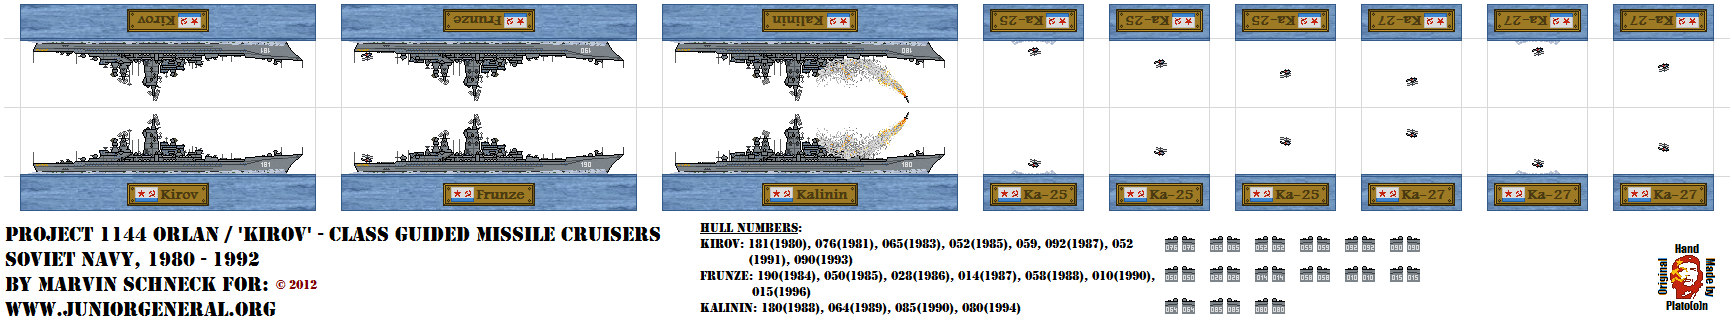 Soviet Guided Missile Cruisers